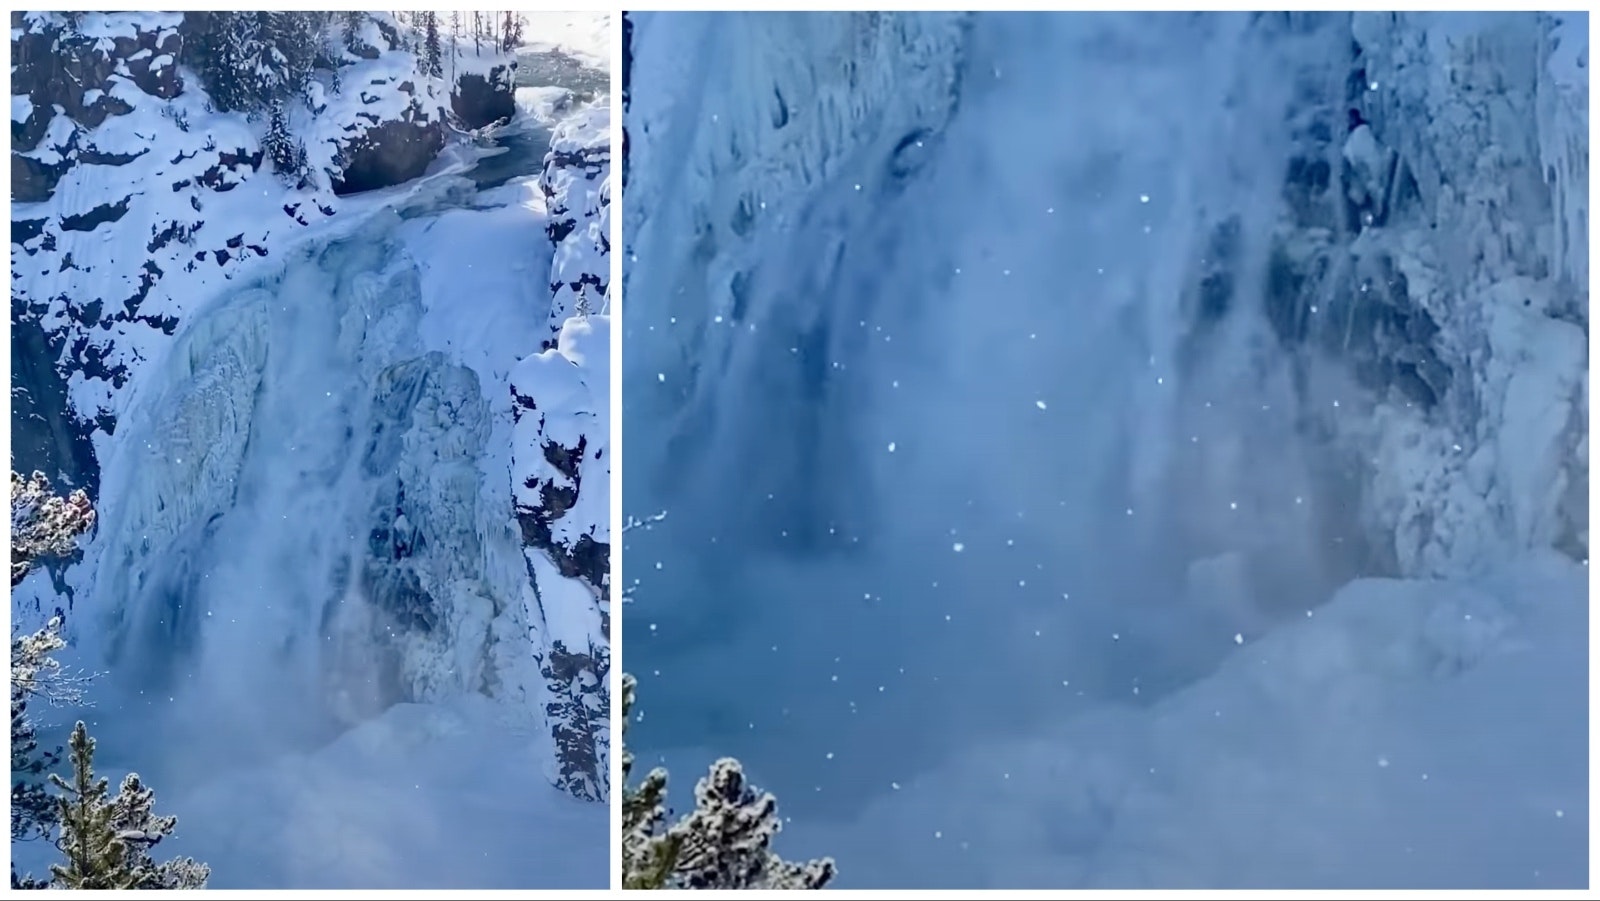 West Yellowstone, Montana, resident Vanessa Lynn-Byerly caught images of “diamond dust," or tiny frozen crystals drifting through the air, at the Upper Falls in the Grand Canyon of the Yellowstone River.